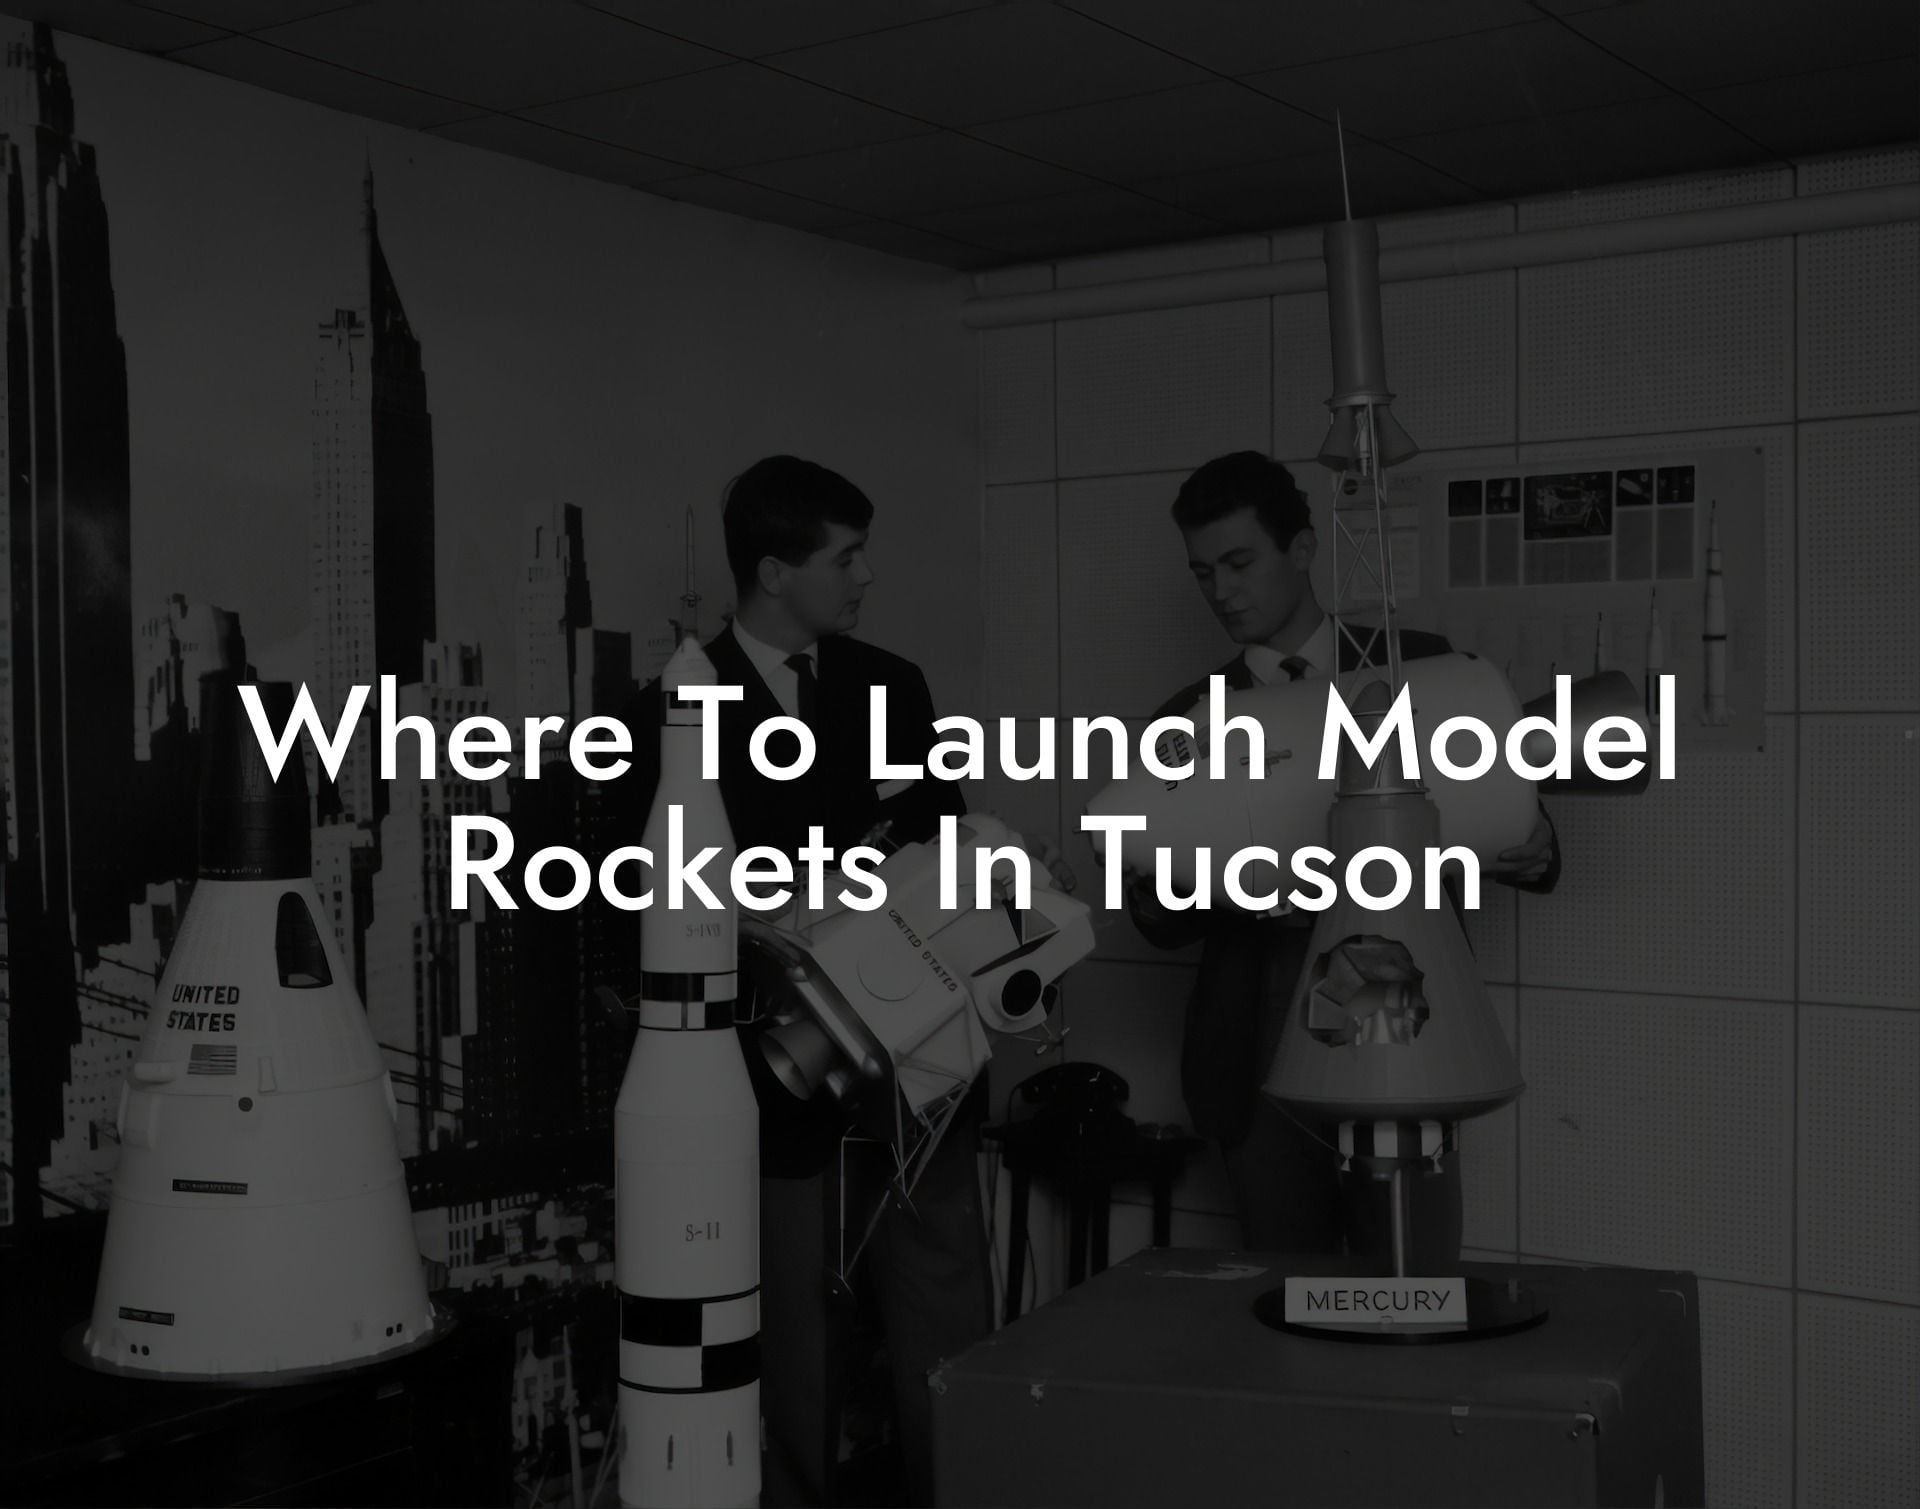 Where To Launch Model Rockets In Tucson